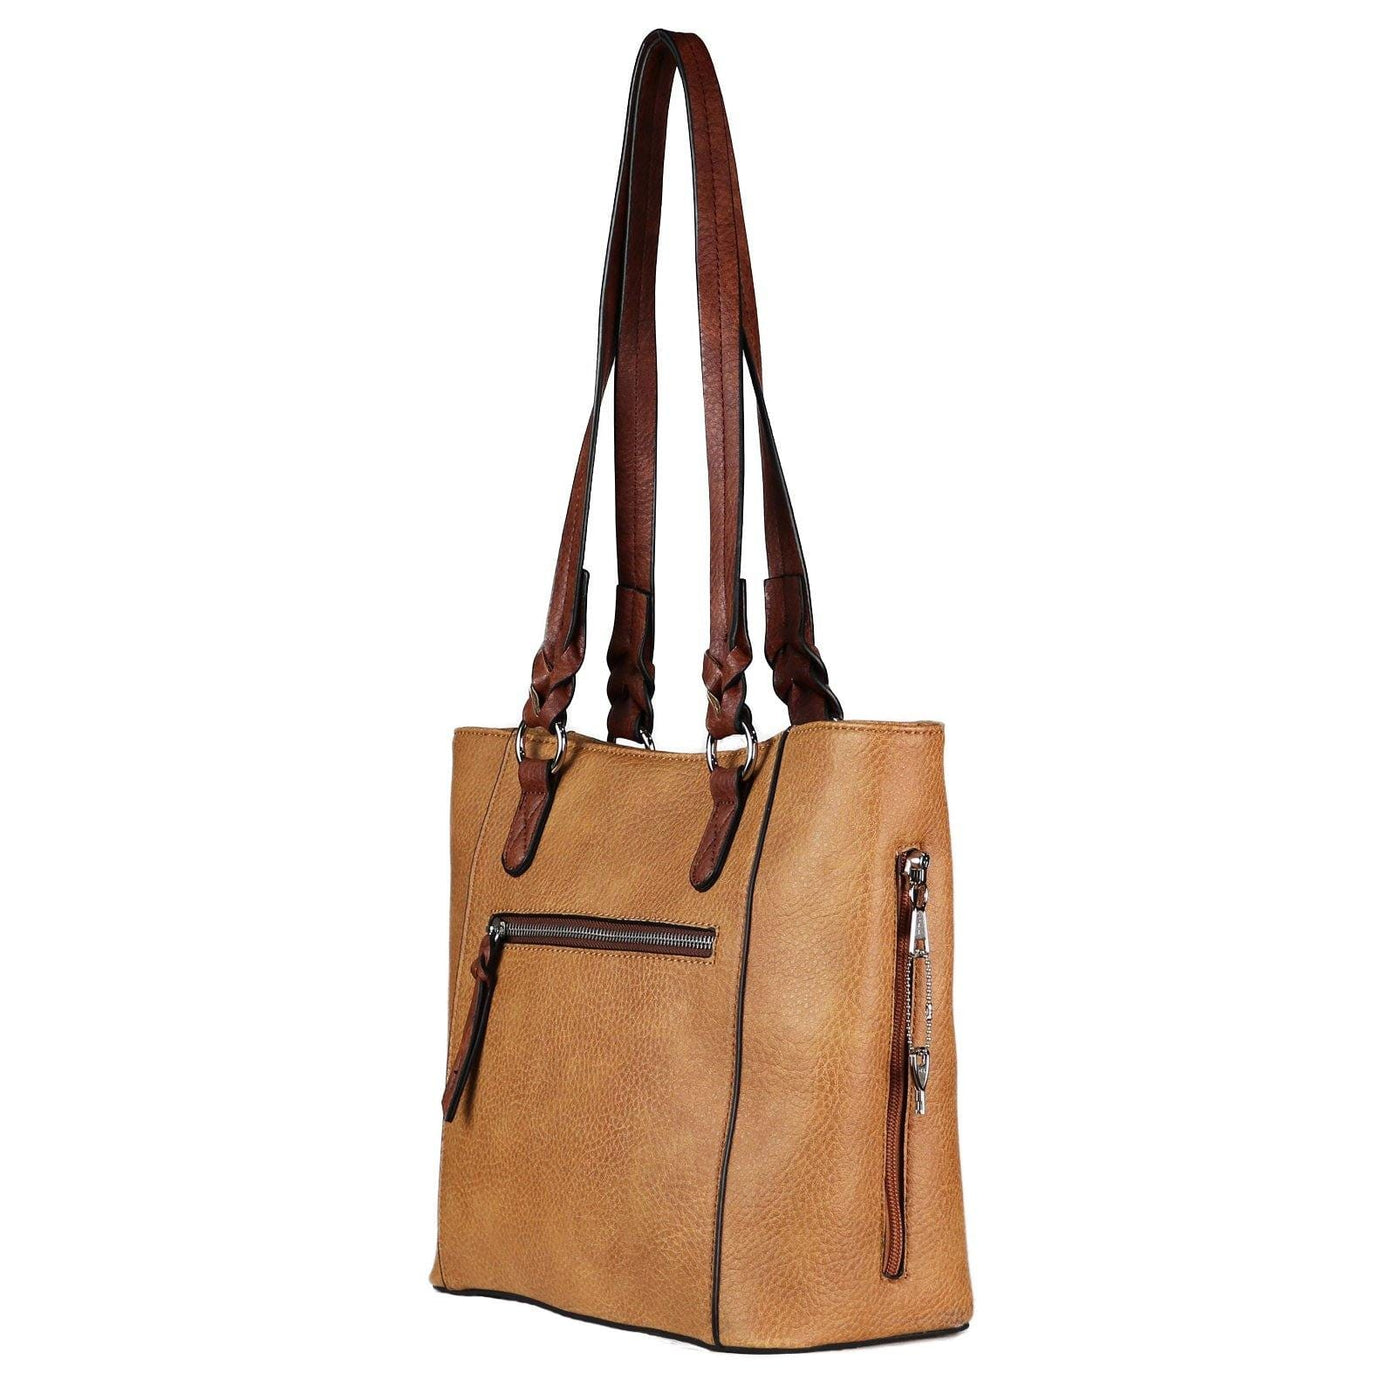 Concealed Carry Grace Tote -  Lady Conceal -  Women conceal carry purse for pistol -  Designer Luxury Tote Carry Handbag -  YKK Locking Zippers and Universal Holster - Easy Concealed Carry - Quick Gun Draw - Safe Gun Bag -  Designer Luxury Conceal Carry Handbag -  carry Handbag for gun carry - concealed carry gun Handbag with locking zipper -  concealed carry Handbag for woman